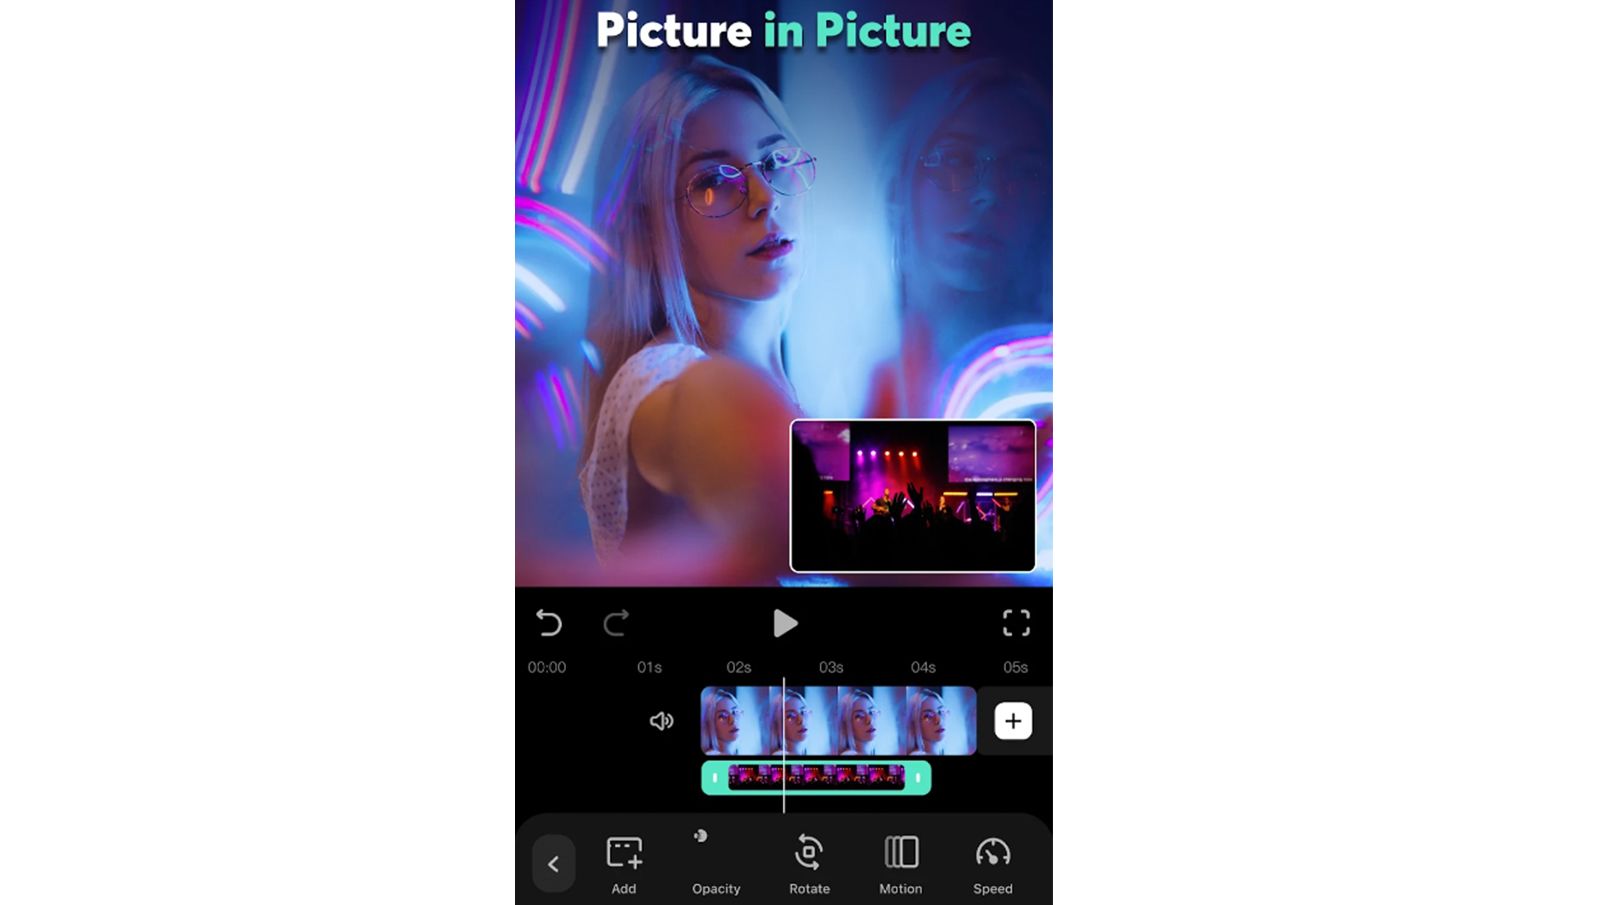 How to Edit Tinder Profile Videos: Best Video Retouch App in 2023